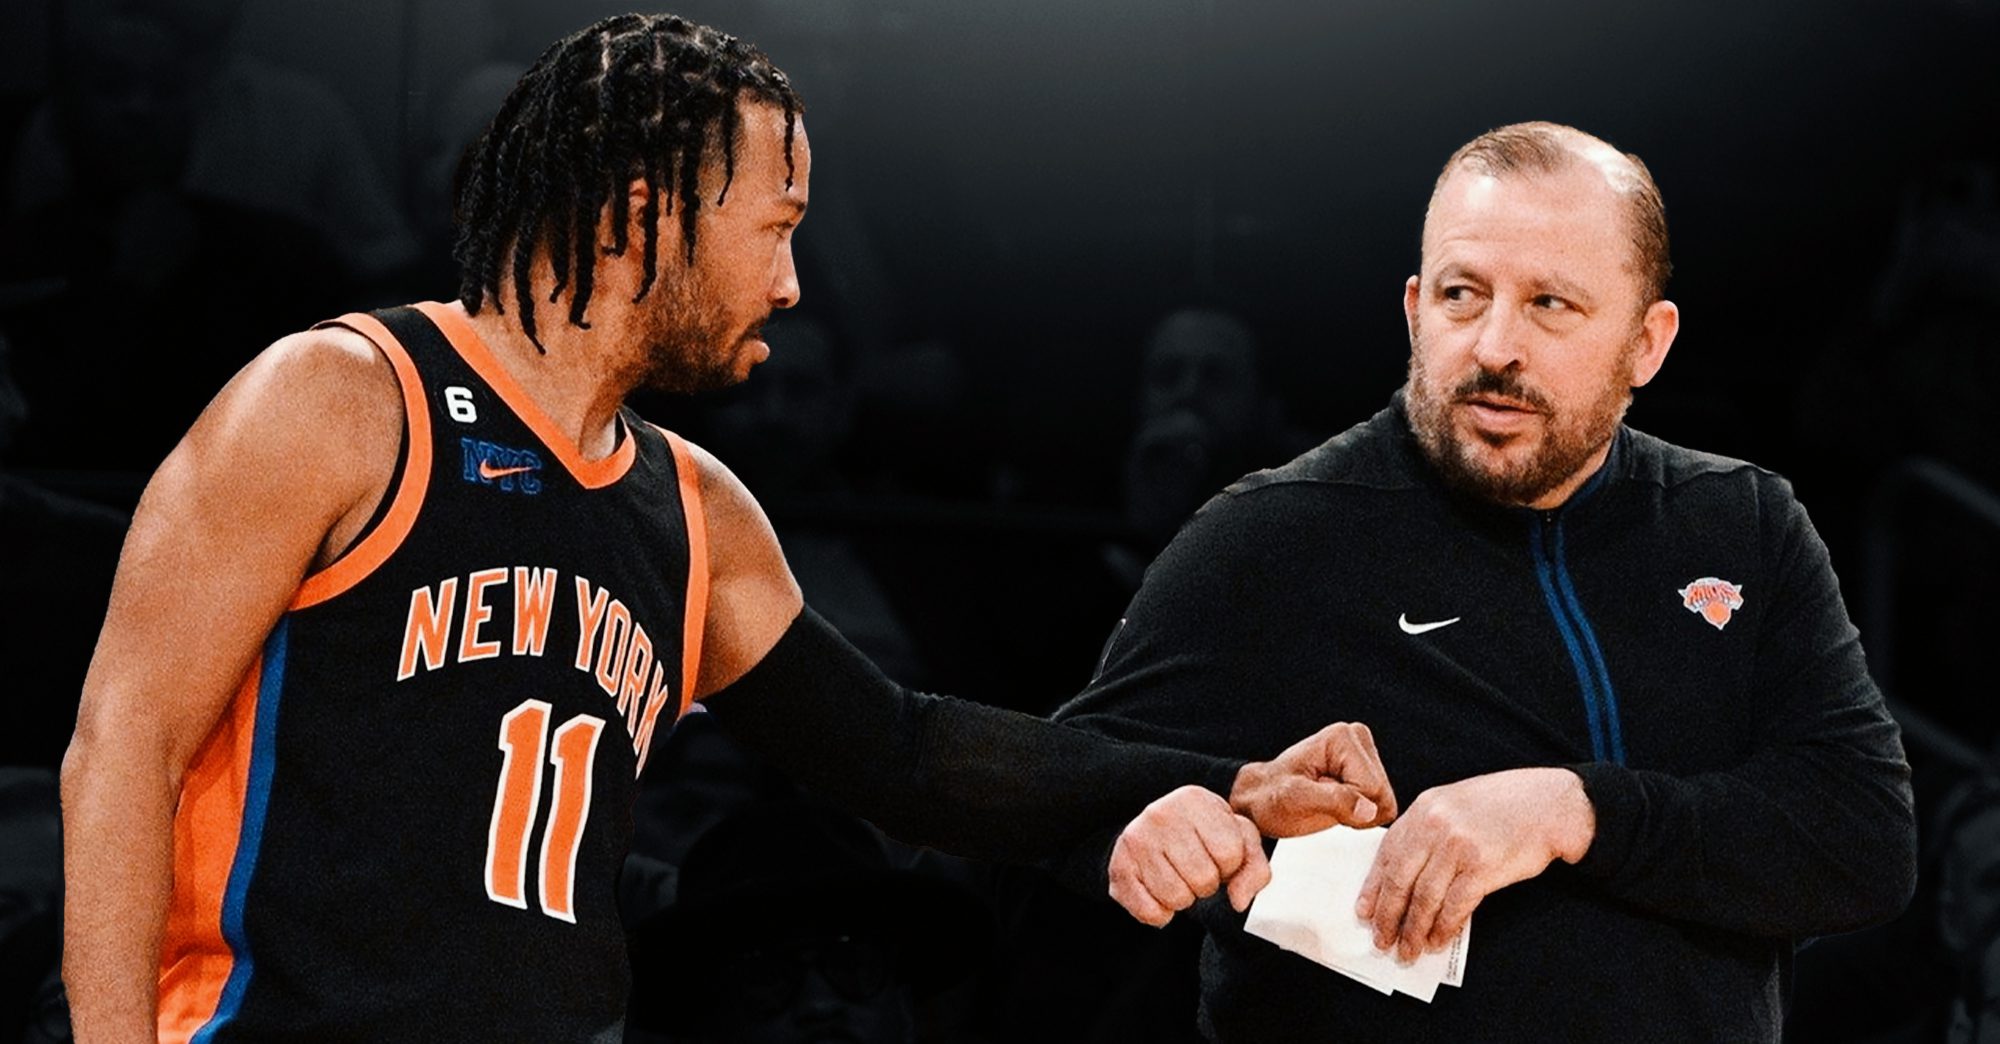 Knicks Players Reveal True Feelings on Tom Thibodeau After Game 7 Loss